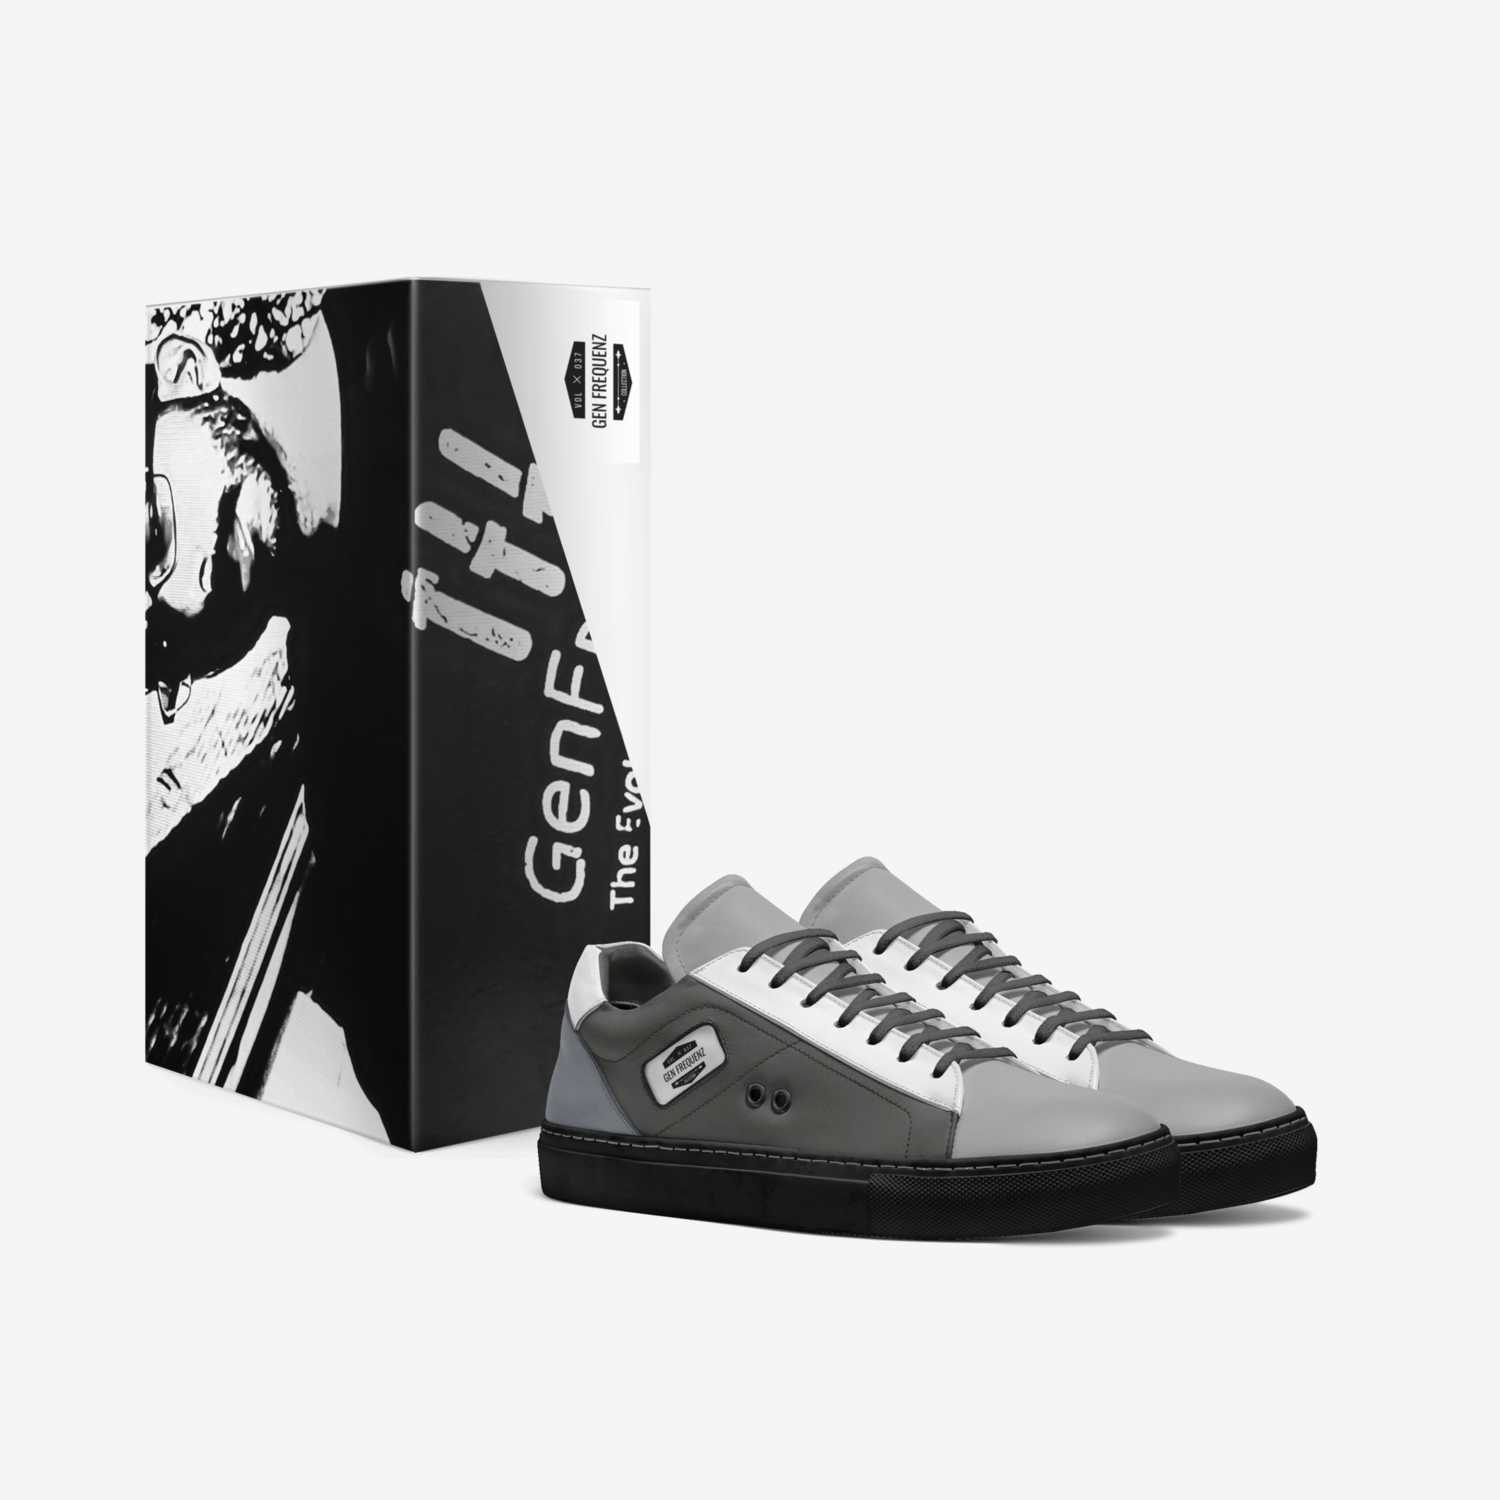 Gen Frequenz custom made in Italy shoes by Gerrald Samraj | Box view